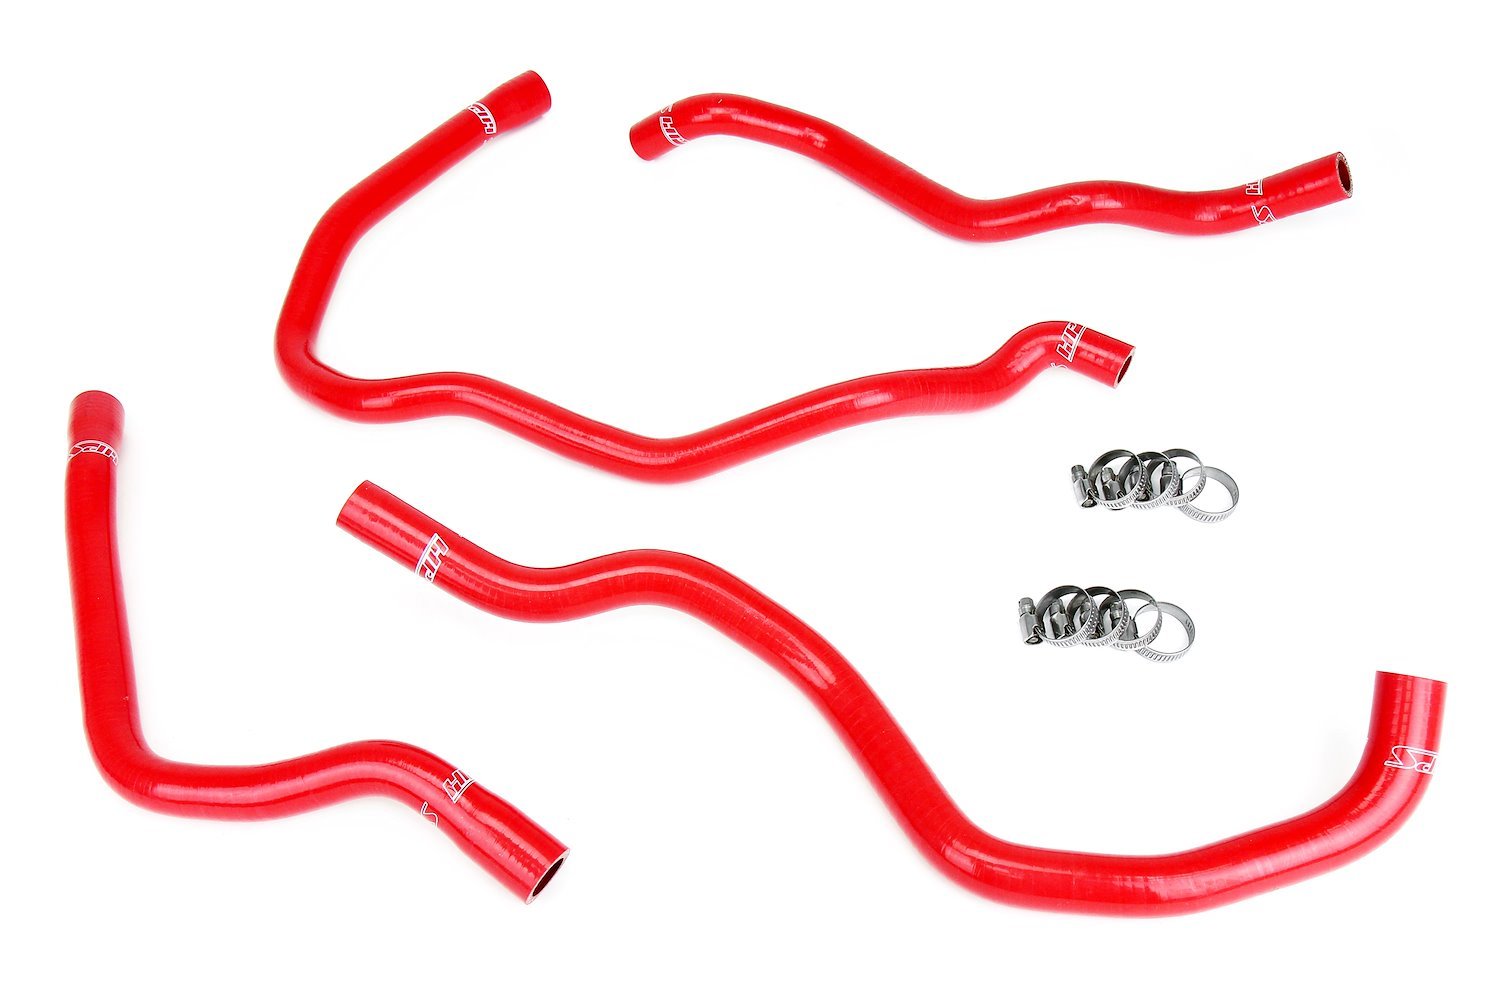 57-1937-RED Heater Hose Kit, 3-Ply Reinforced Silicone, Replaces OEM Rubber Heater Coolant Hoses